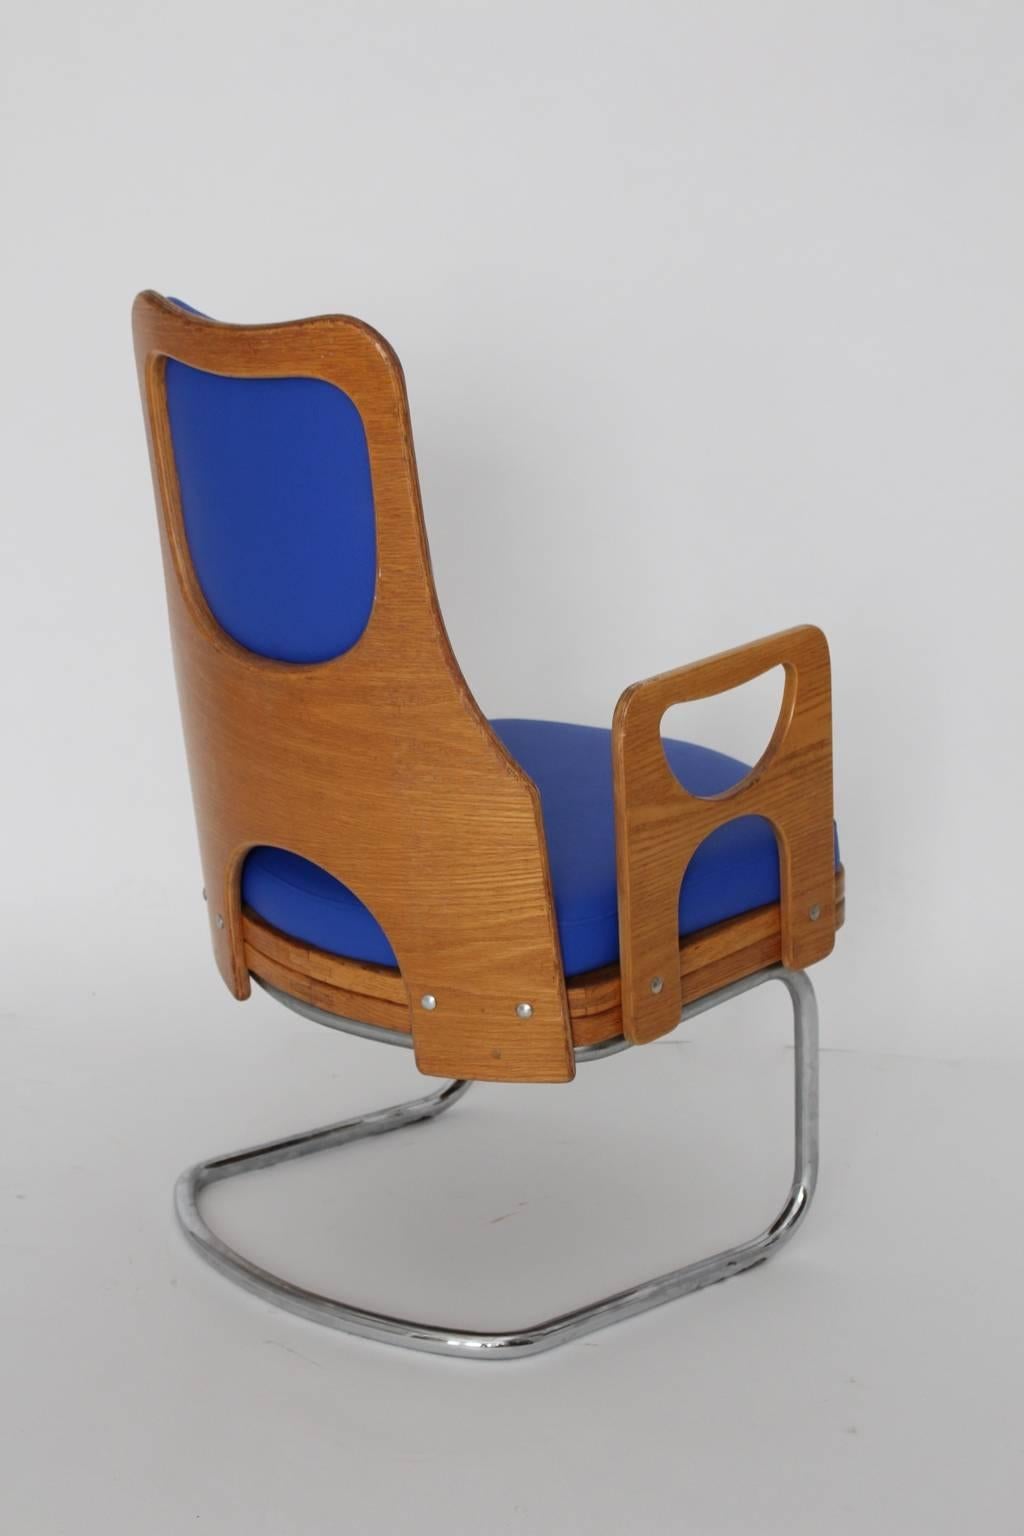 Space Age vintage blue armchair or lounge chair or club chair from teak plywood and chromed tubular steel.
The upholstery is covered with faux leather in bold blue color tone, which reminds on cornflowers.
Very good condition with minor signs of age